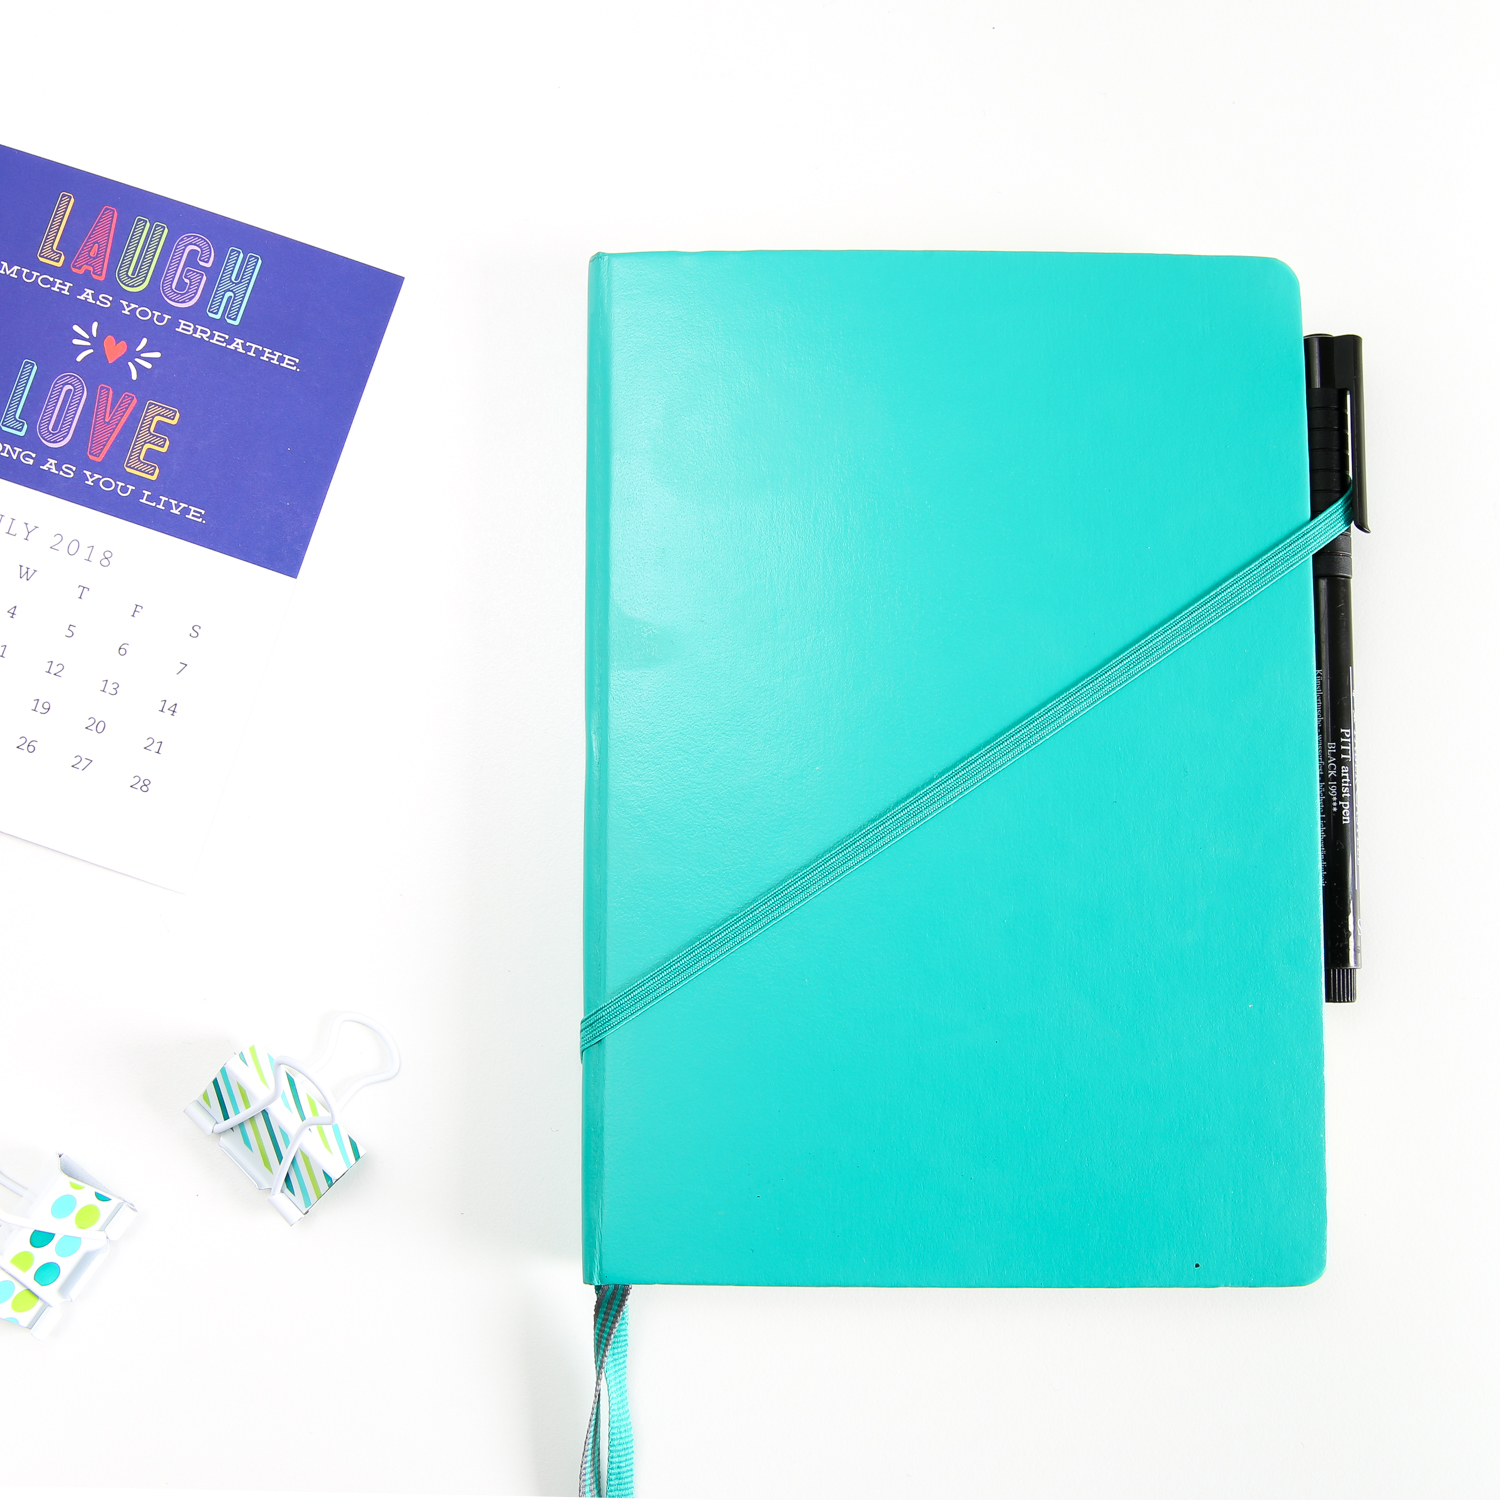 11 Brilliant Hacks That Will Take Your Bullet Journal to the Next Level